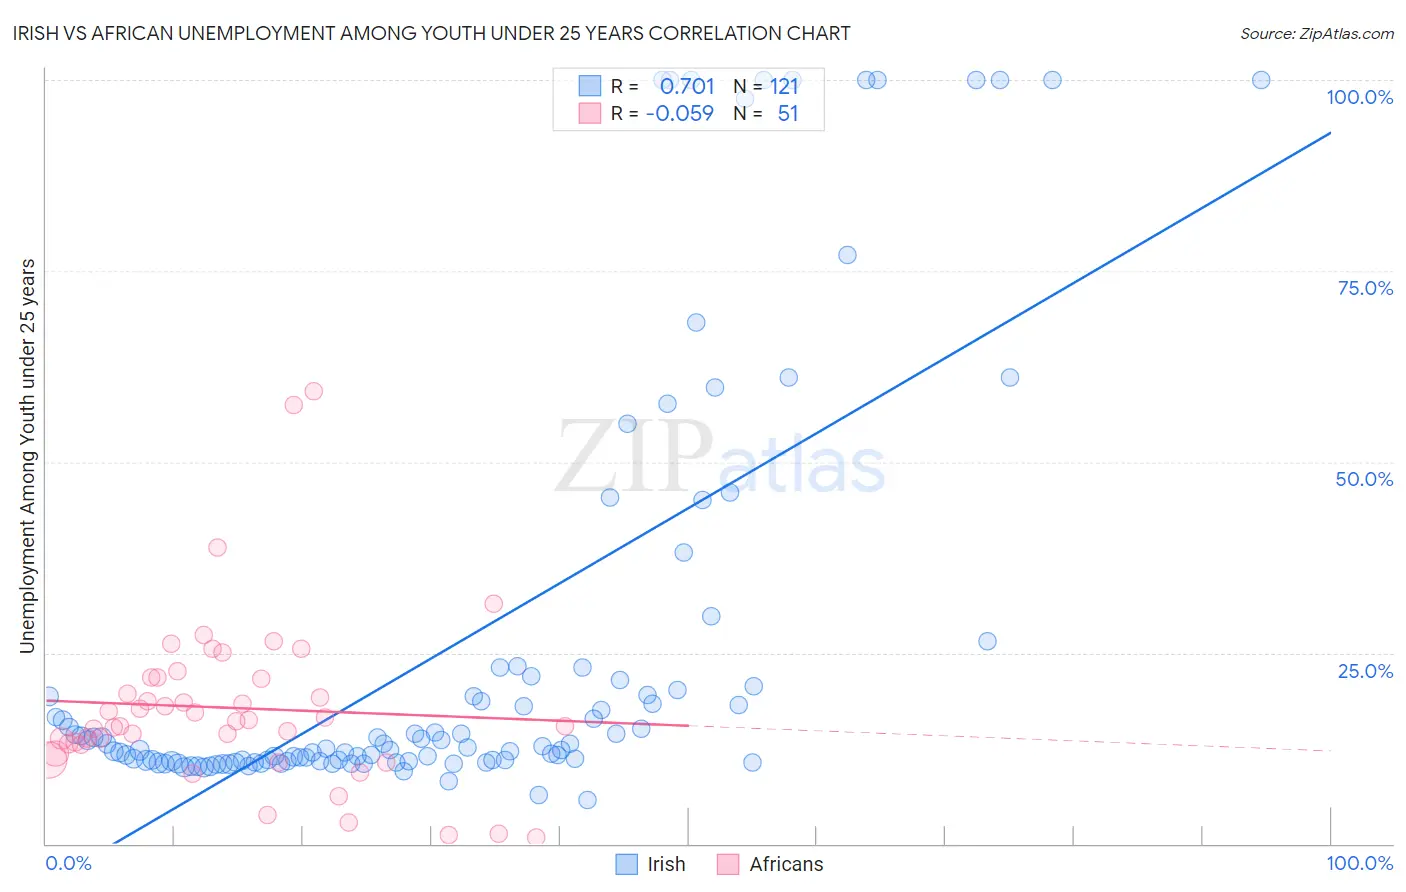 Irish vs African Unemployment Among Youth under 25 years